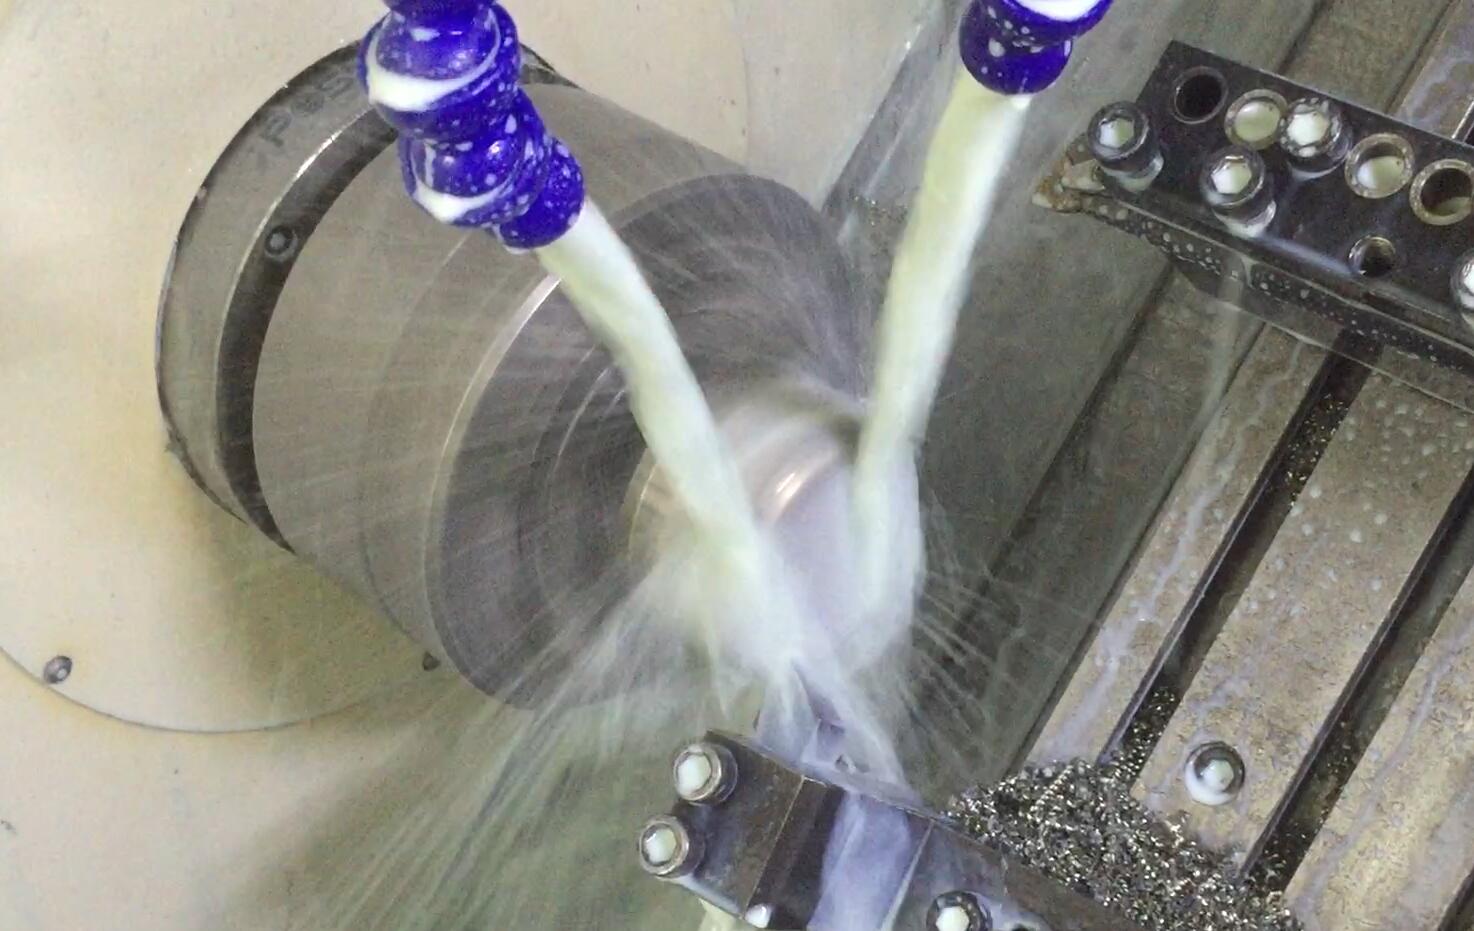 Turning stainless steel